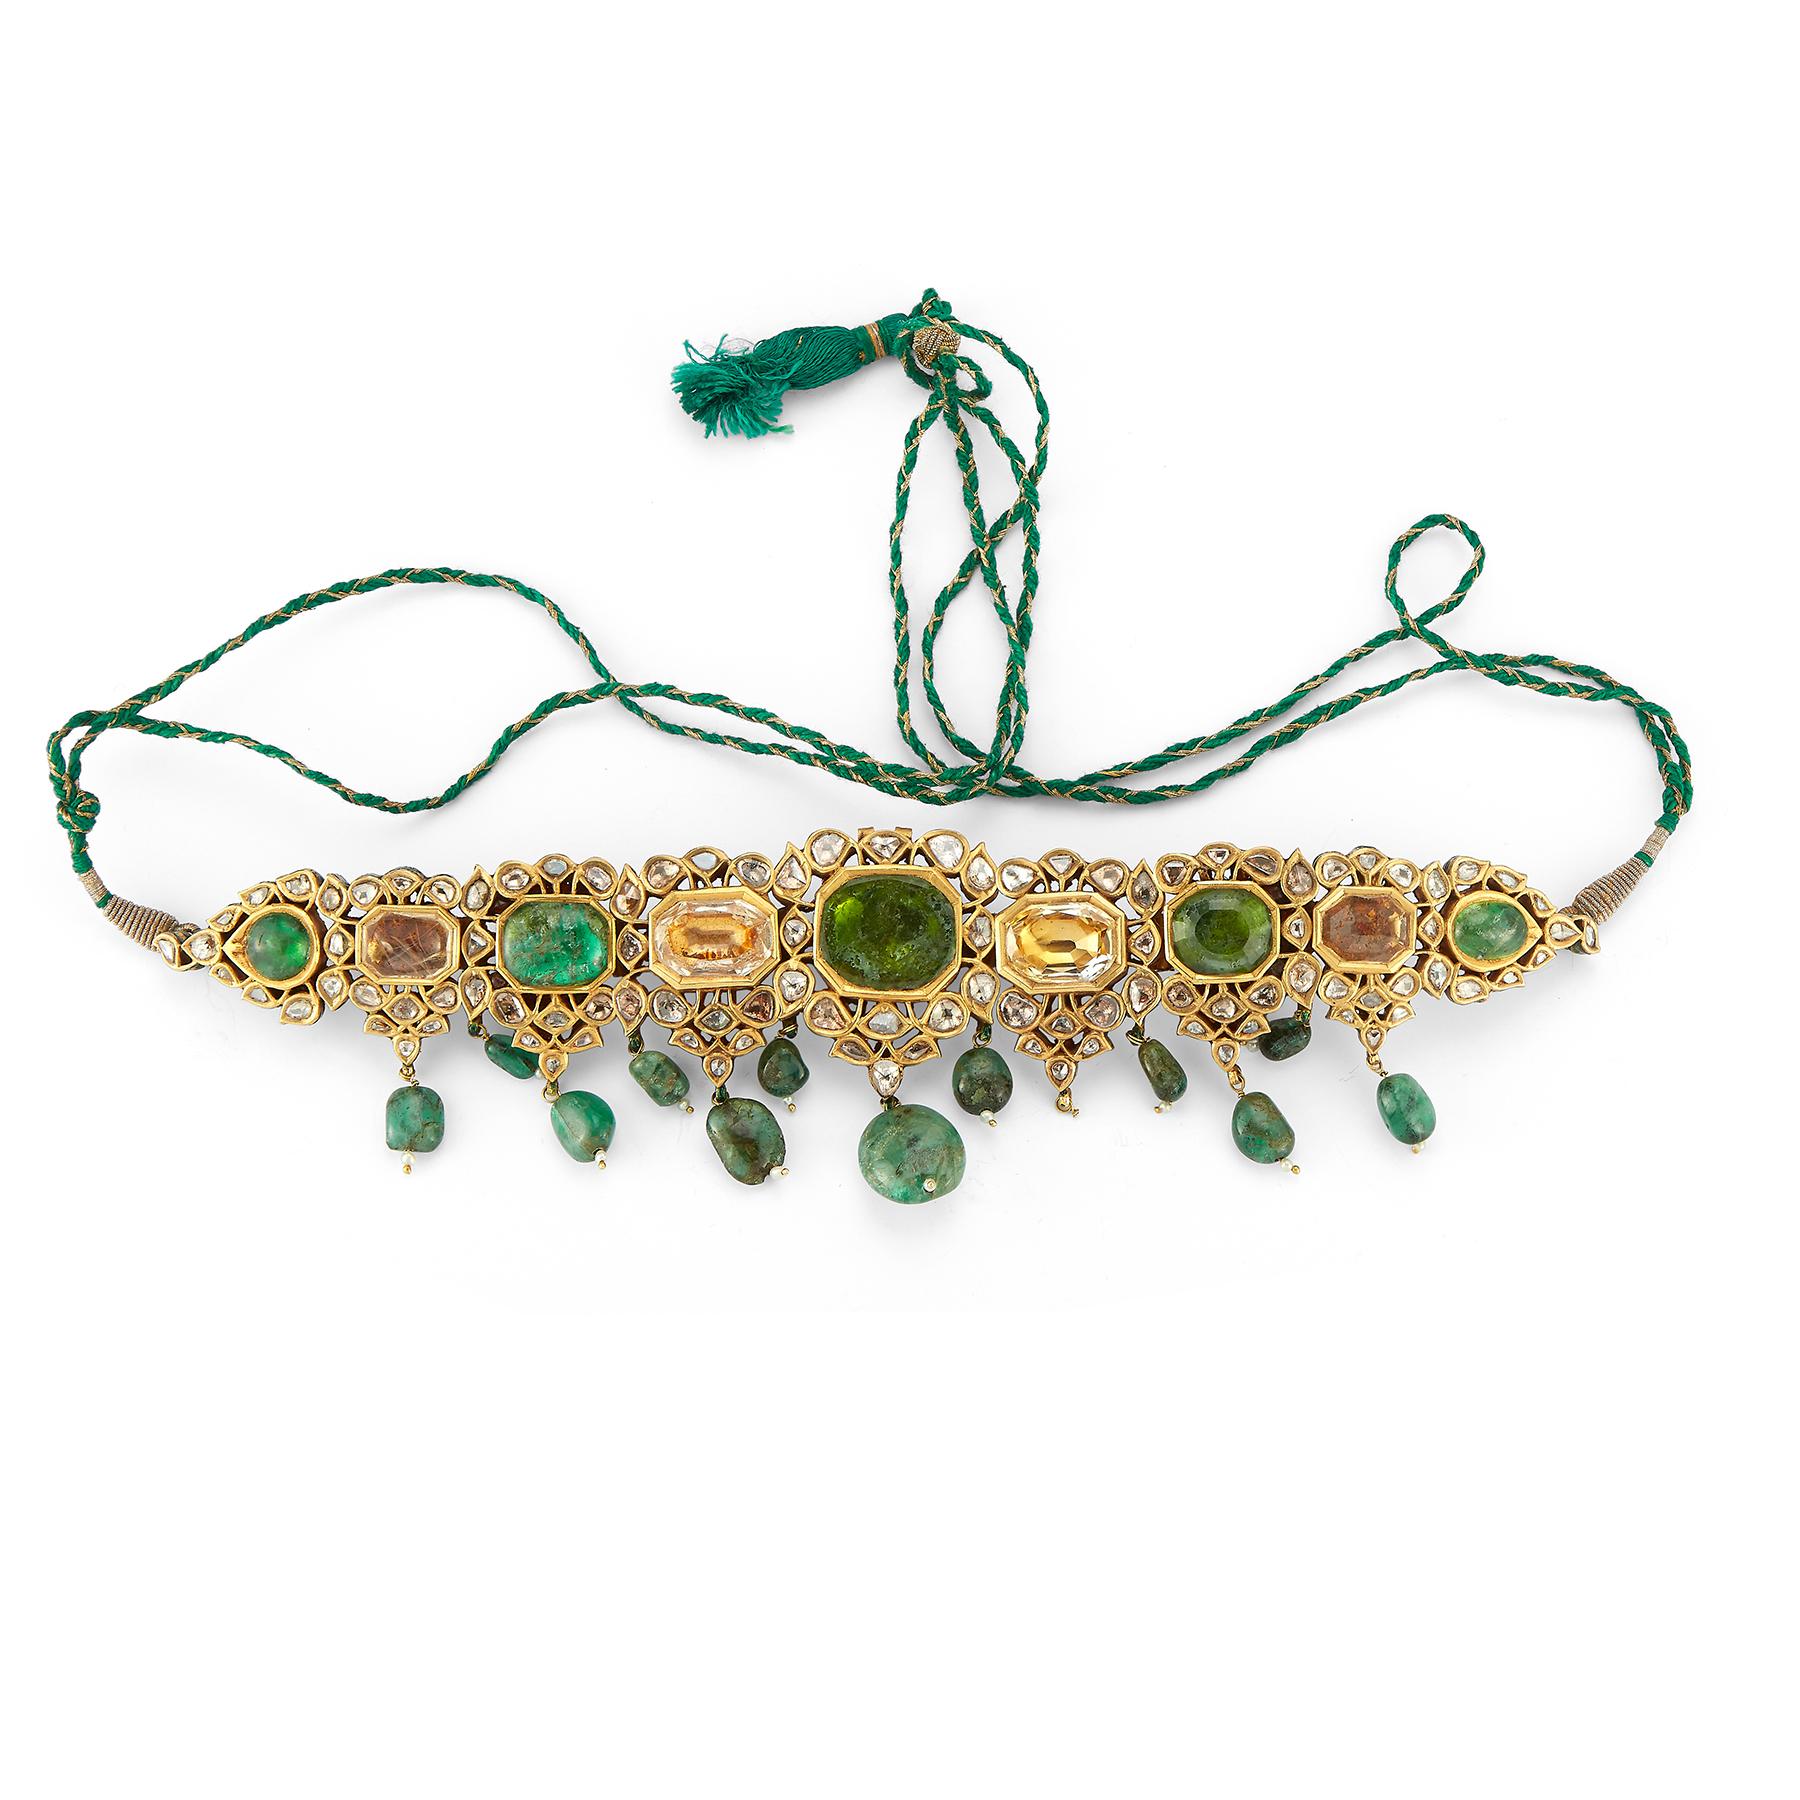 Mughal Indian Emerald Necklace
With ornate hand enamel on the reverse
Adjustable cord for length
Made circa 1850
Measurements: 8.5